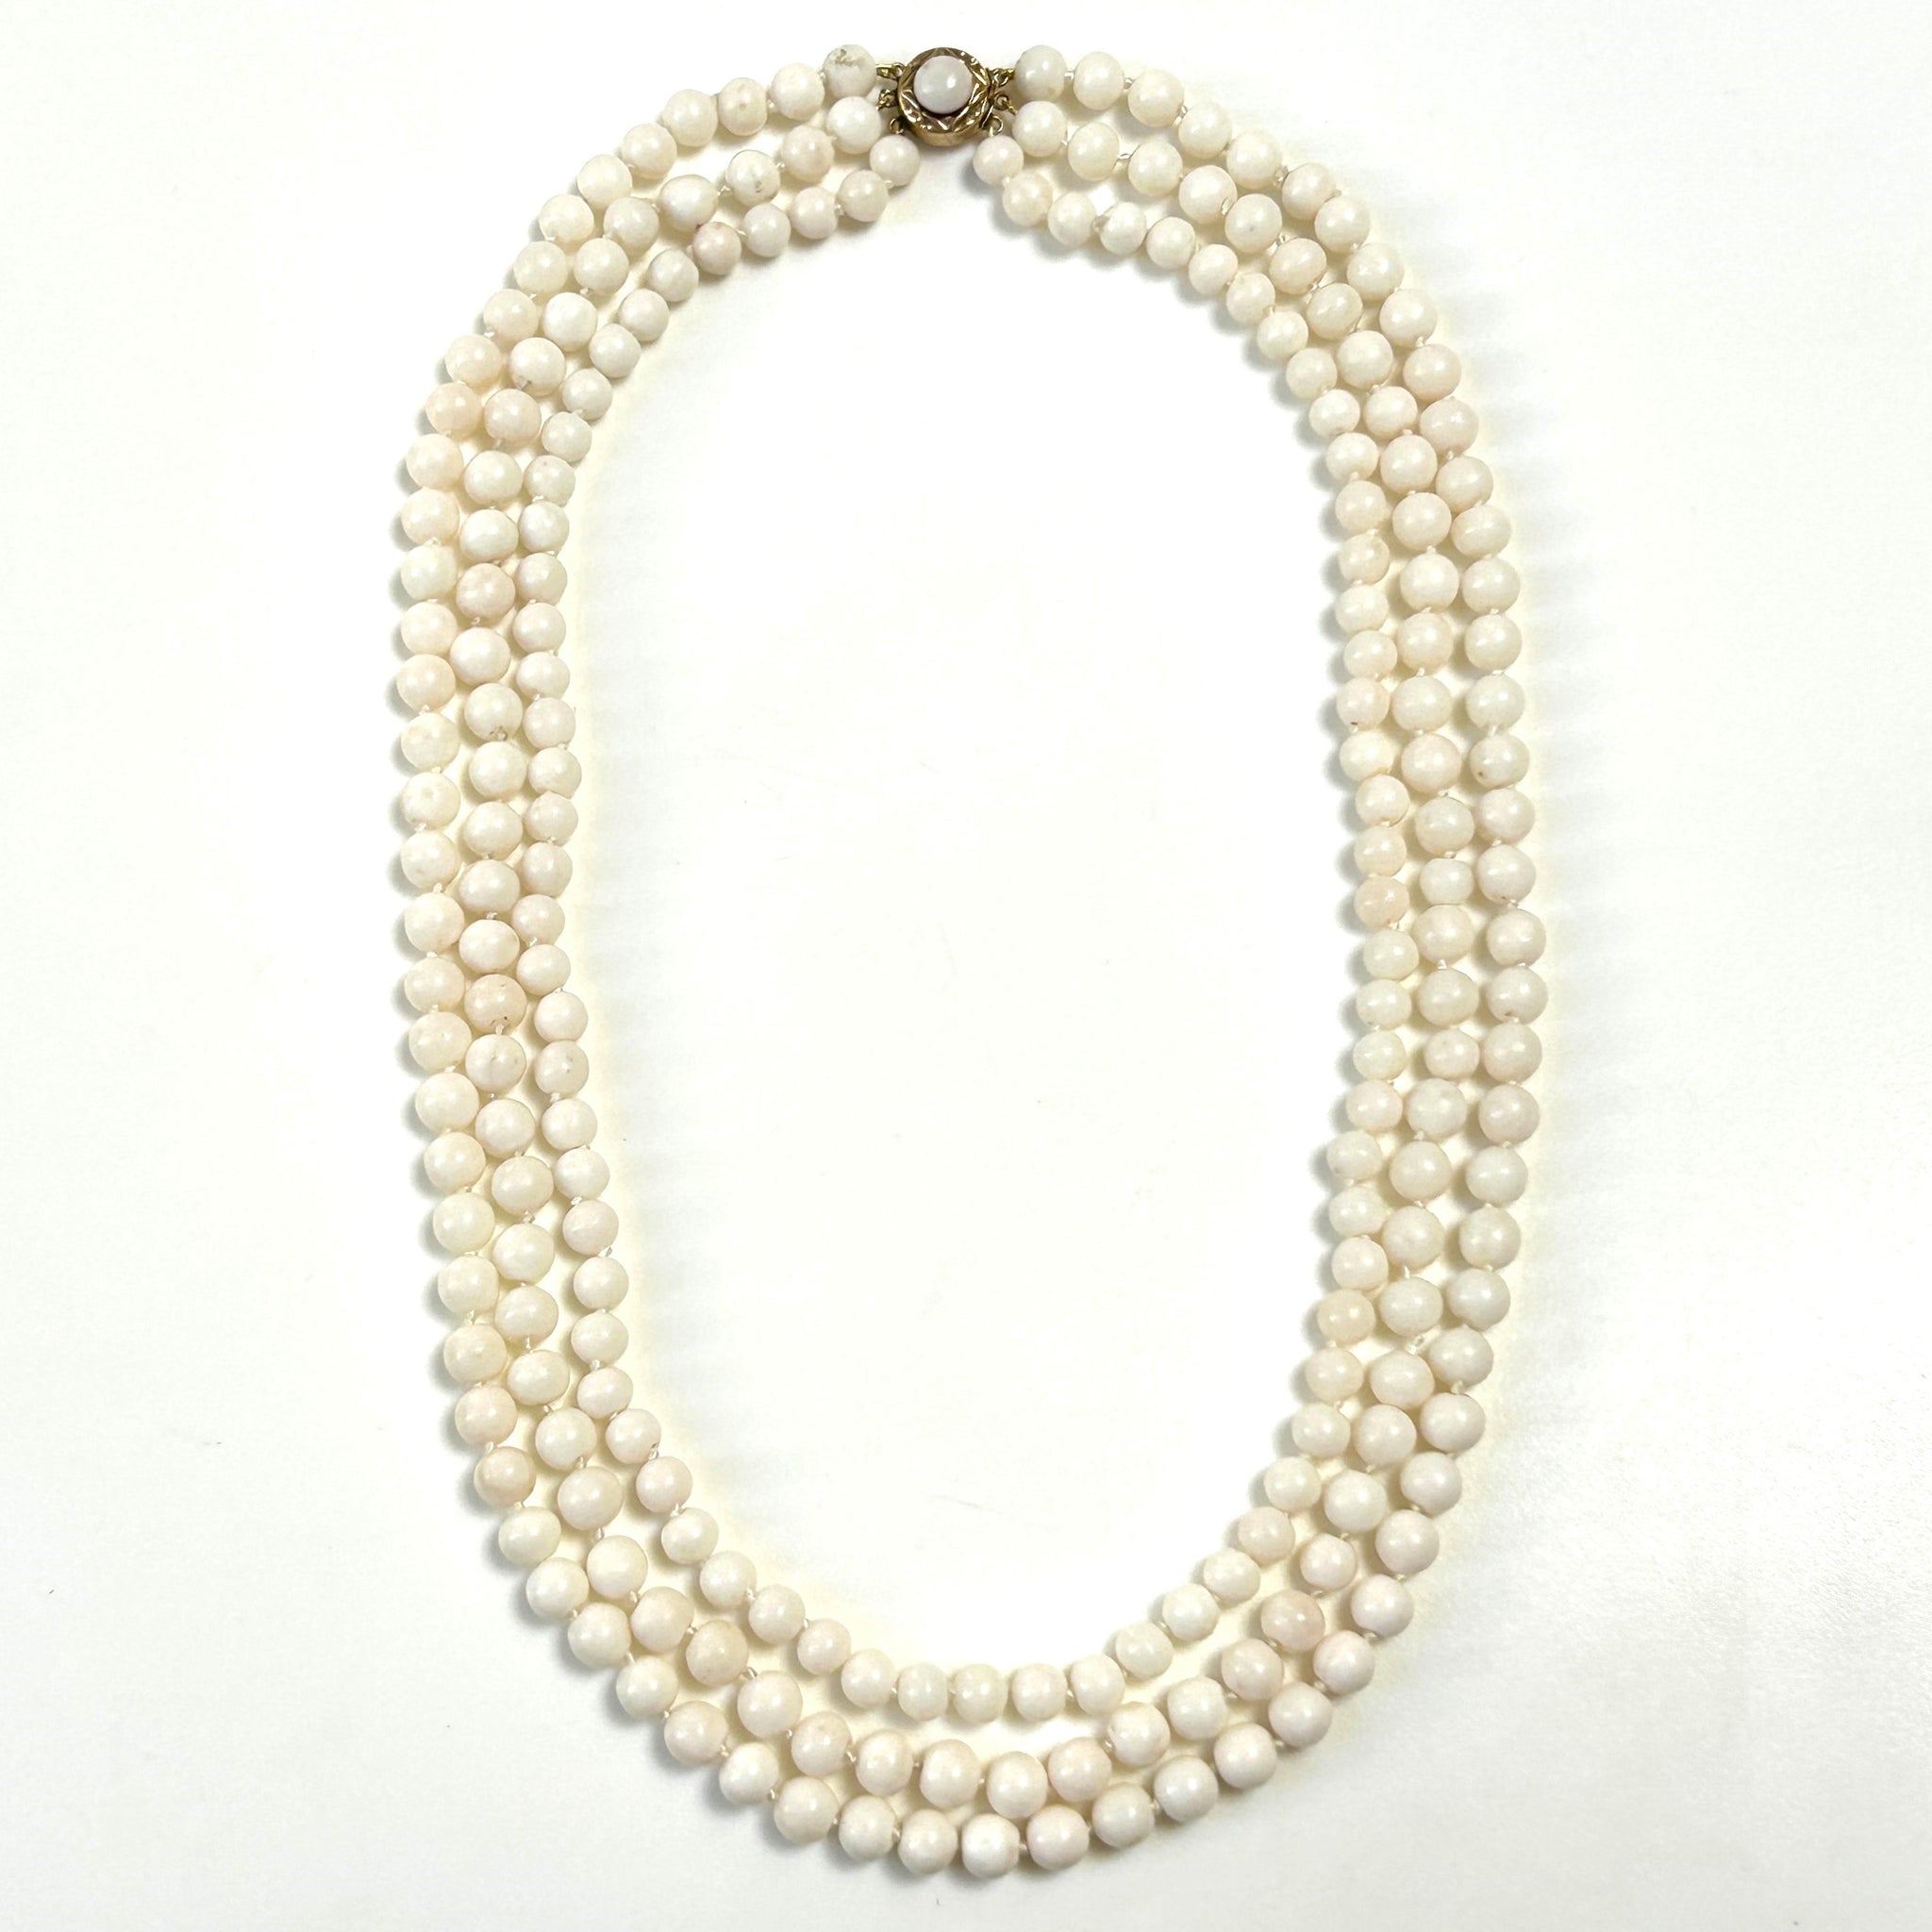 White Coral Triple-strand Necklace with 14ct Gold Clasp